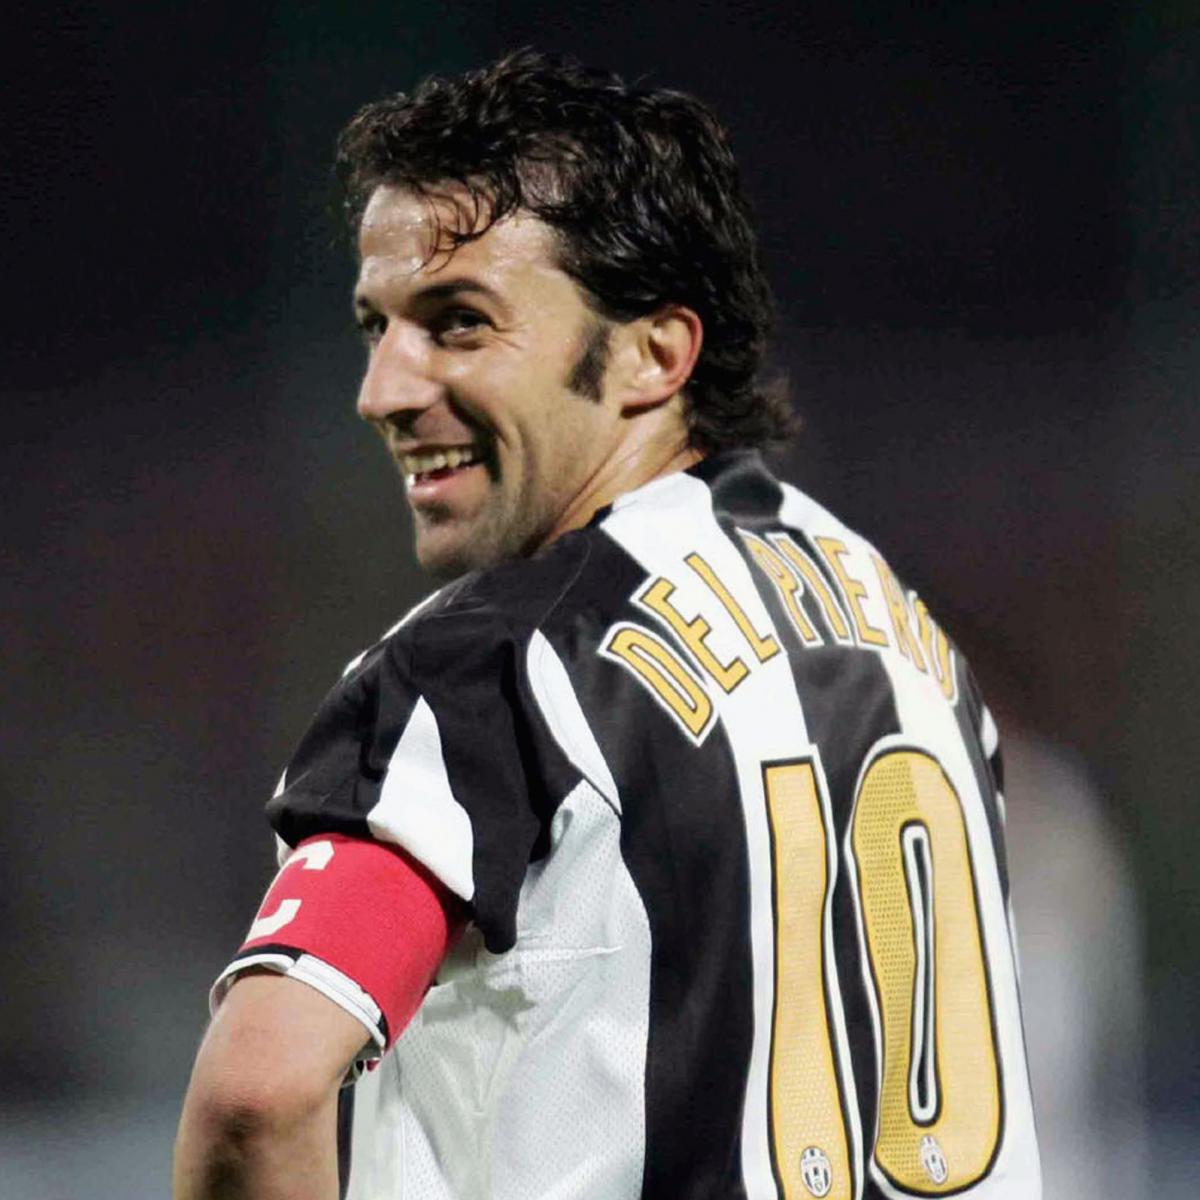 Alessandro Del Piero: 10 Wonder Goals from the Juventus and Italy Legend